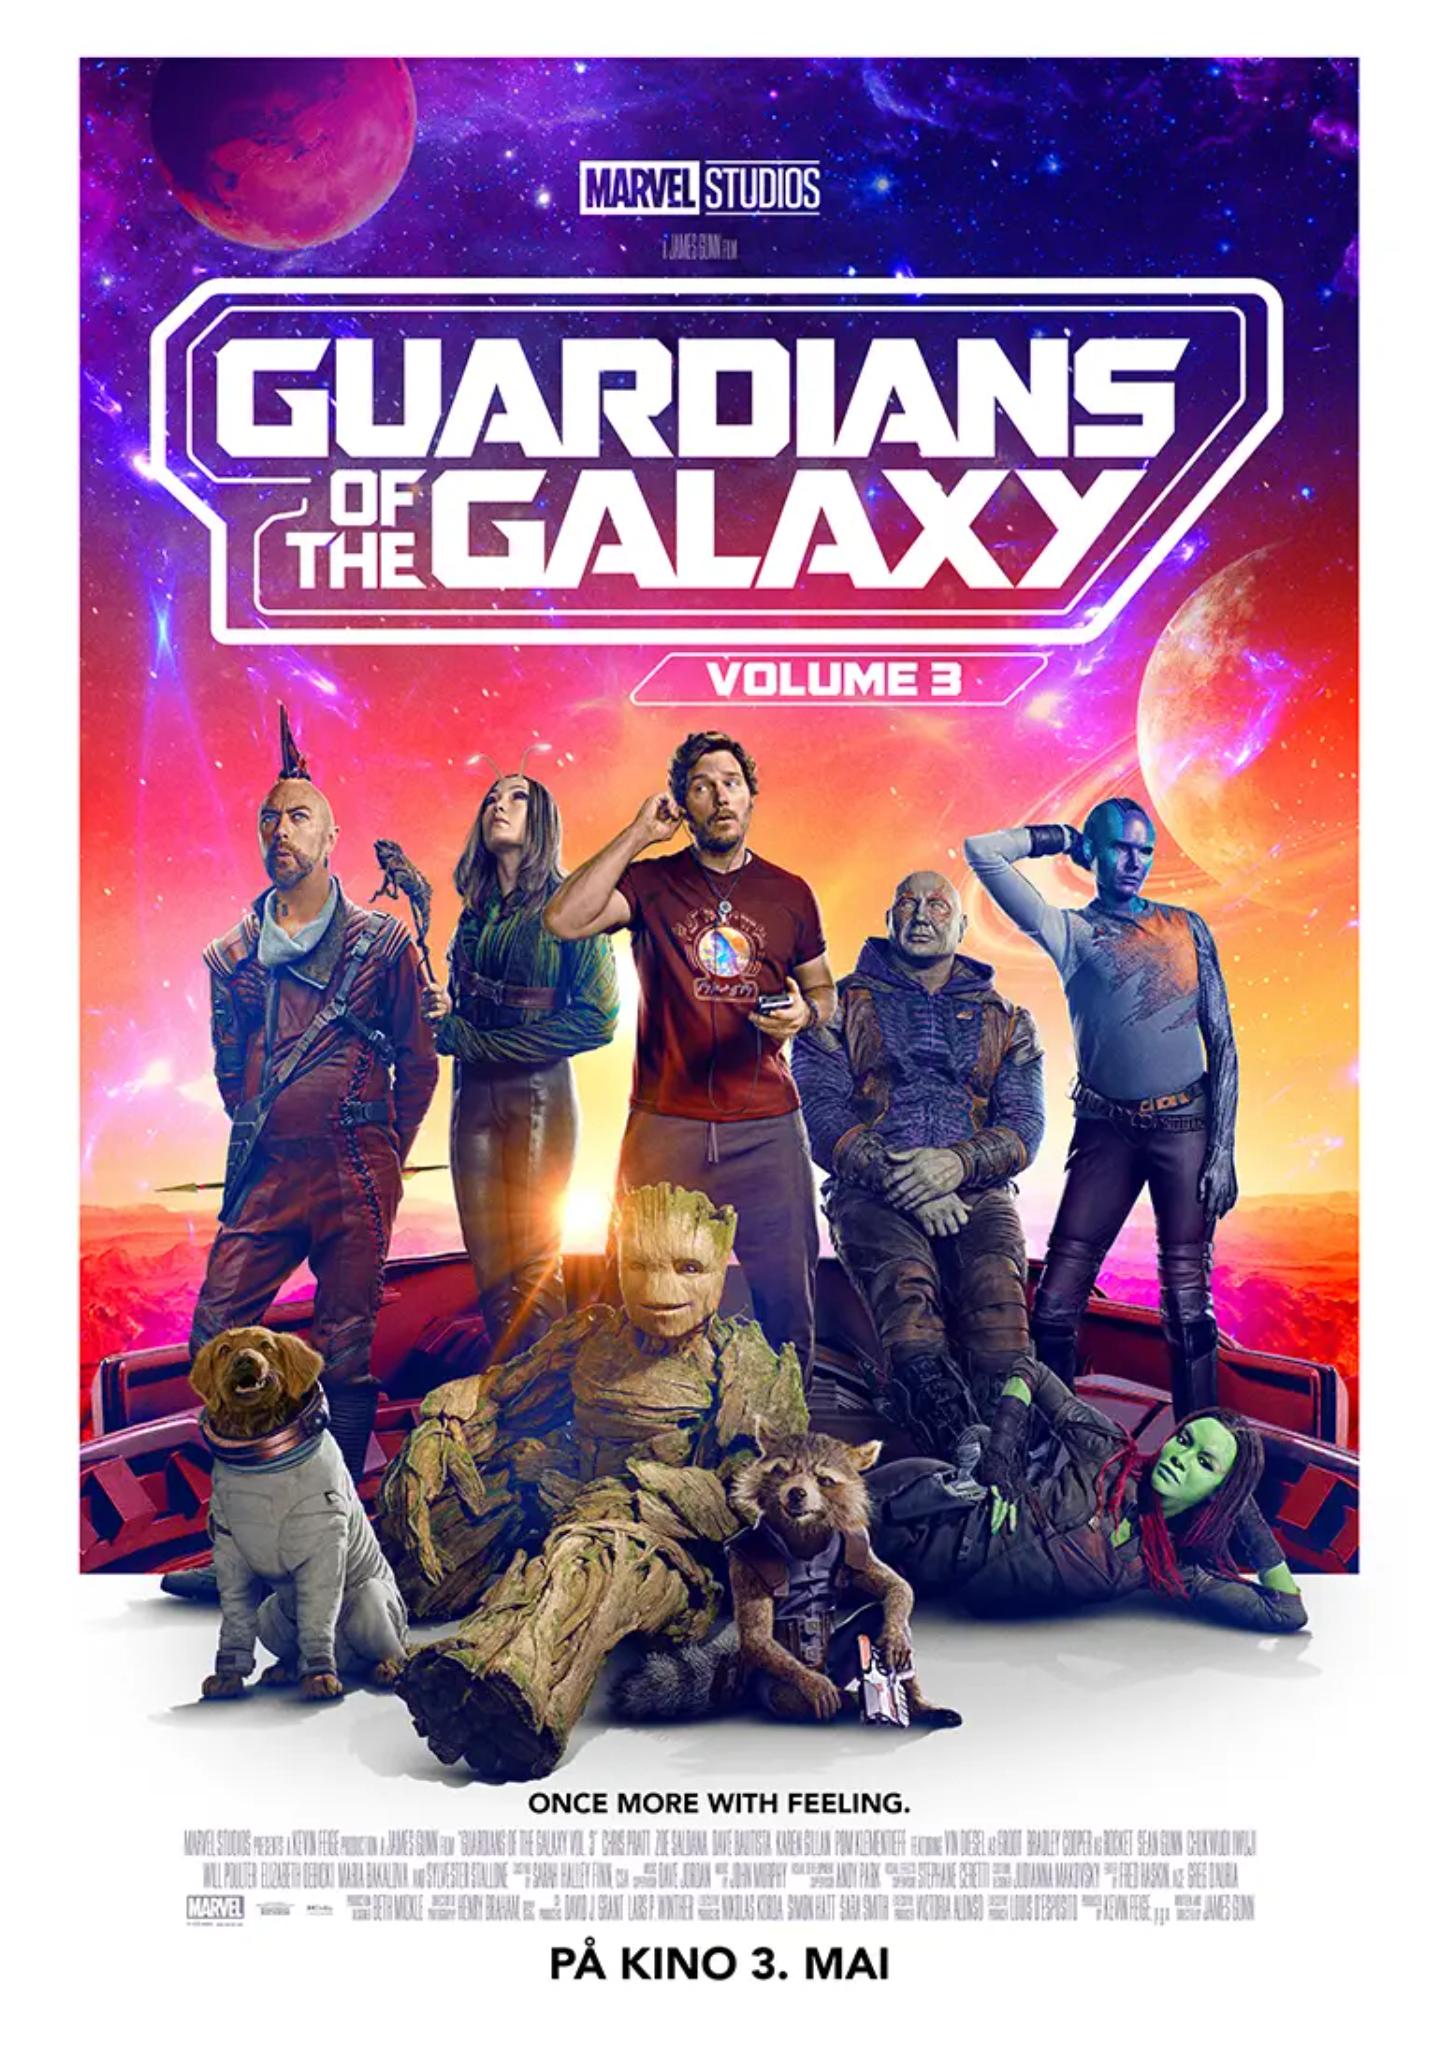 Plakat for 'Guardians of the Galaxy Vol.3'